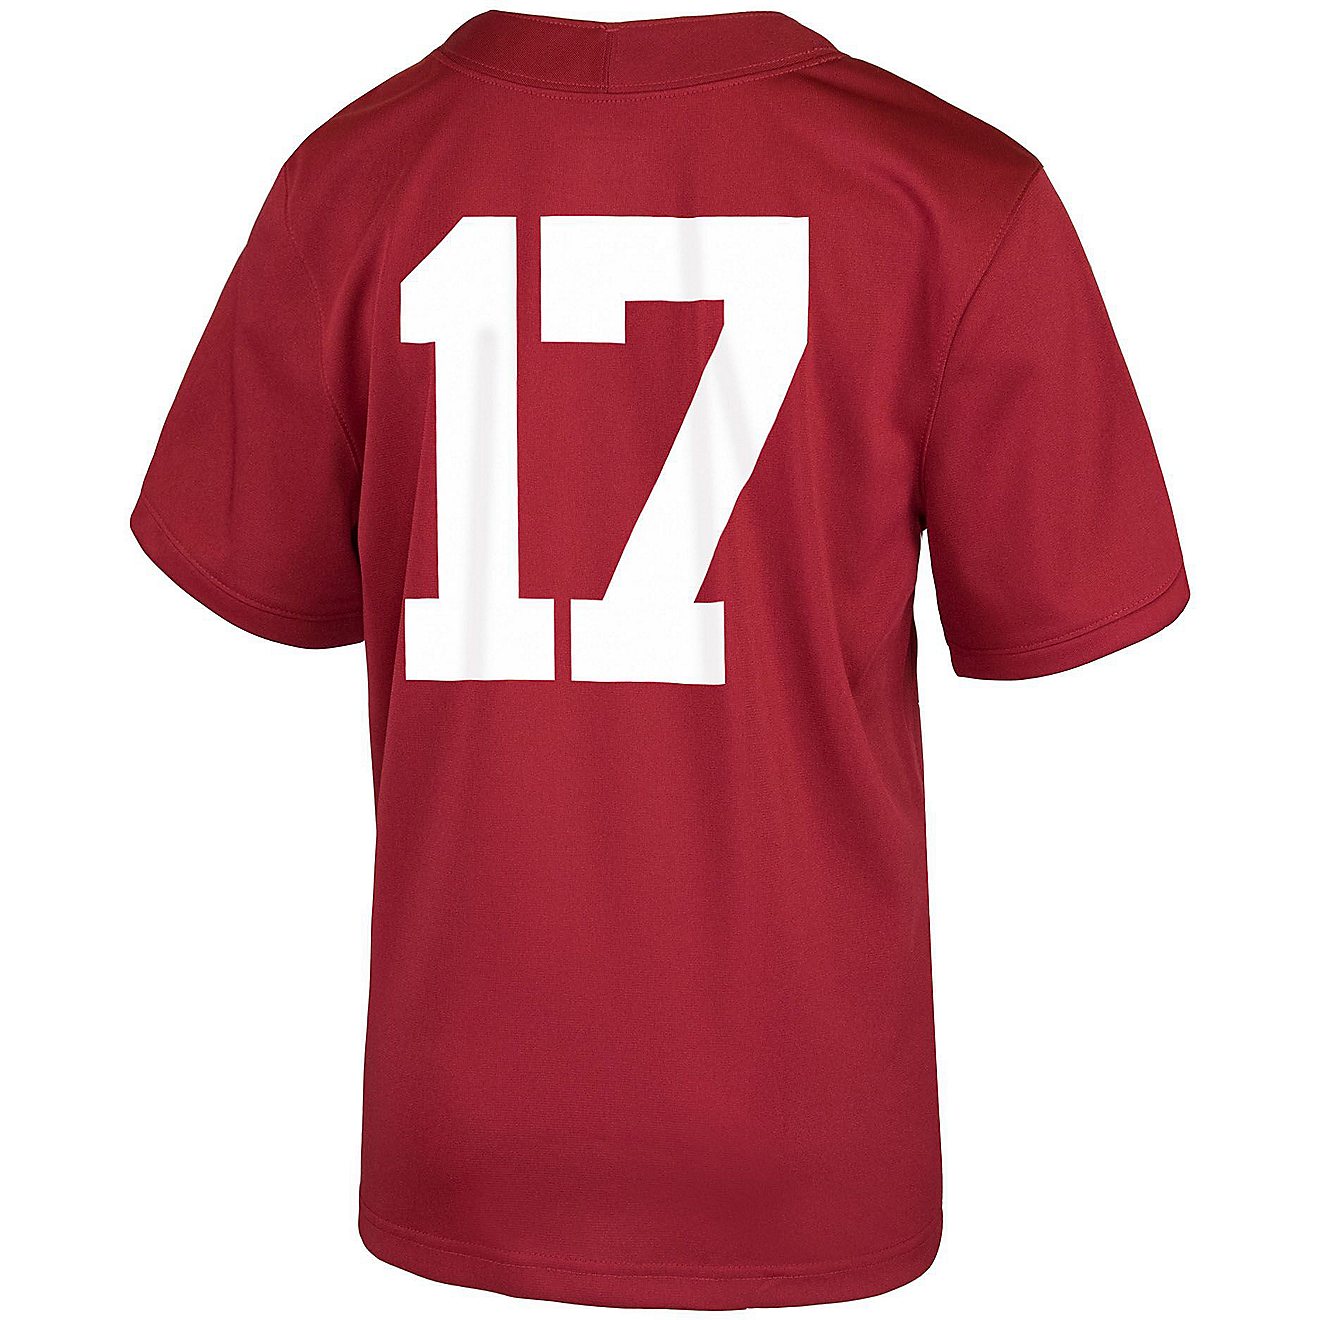 Nike Boys' University of Alabama Young Athletes Replica Football Jersey                                                          - view number 2